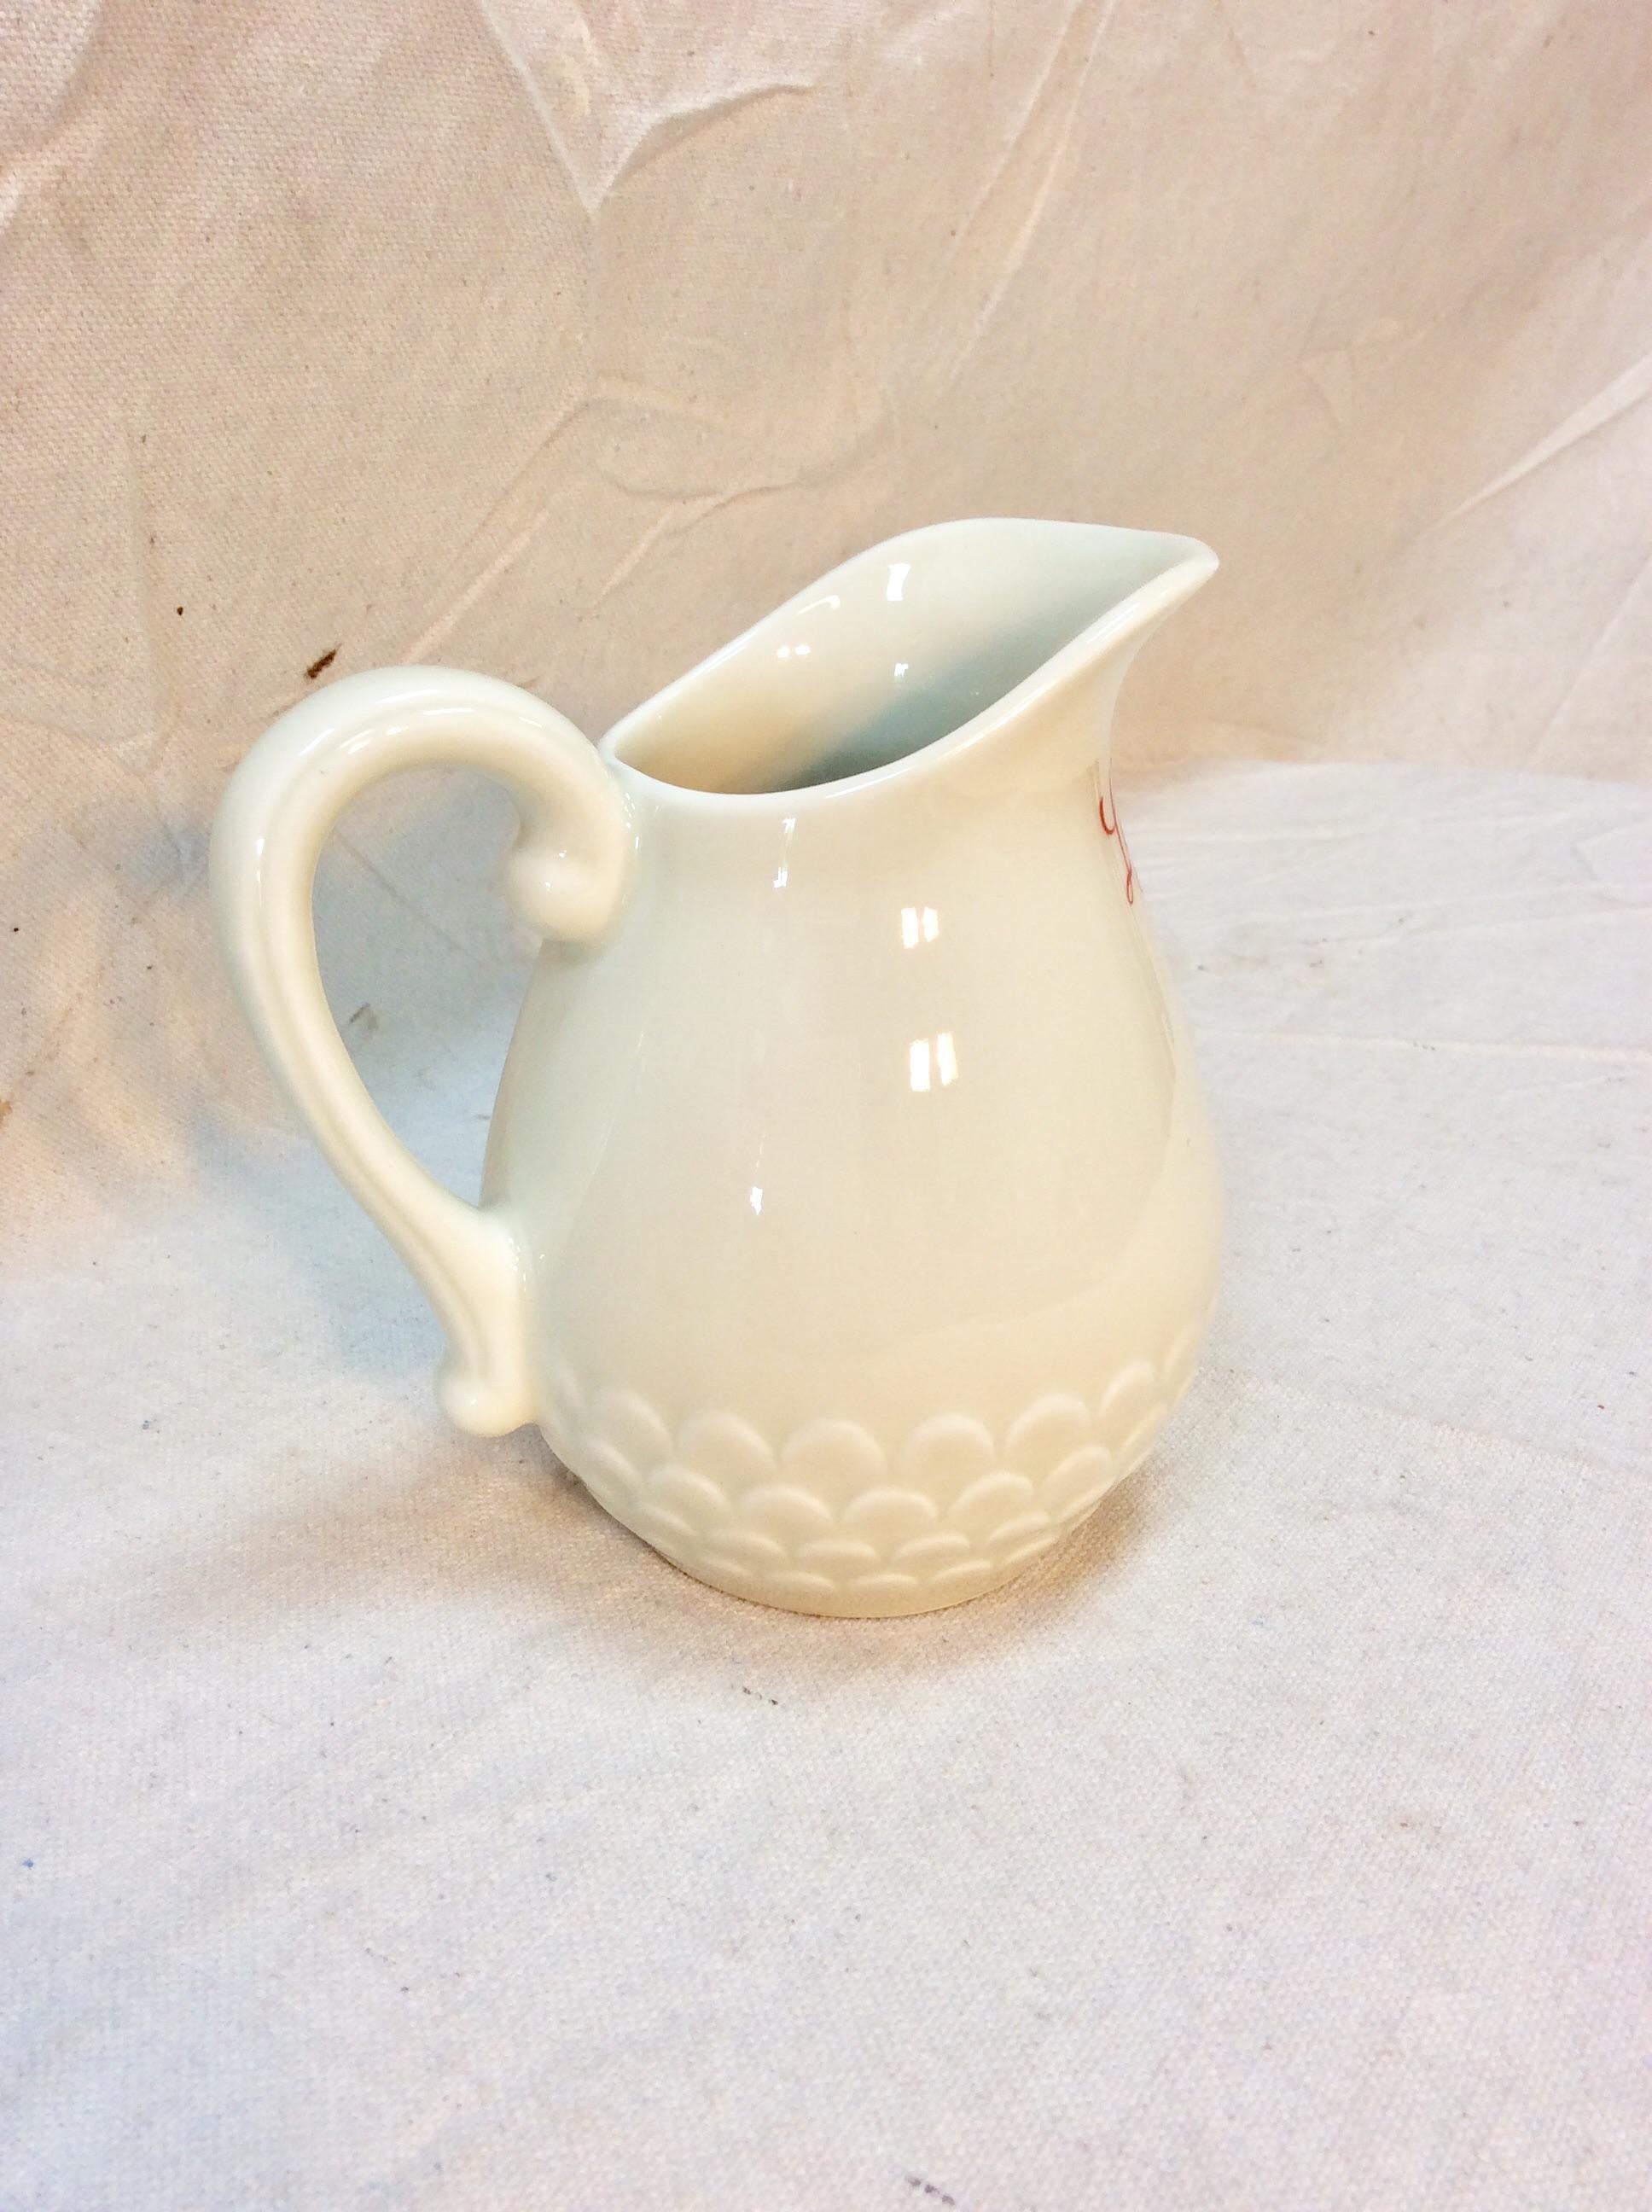 Found in the South of France, this 20th Century French Limoges Restaurantware Pitcher is hallmarked on the upper side Le Jourdan which was most likely the name of the French restaurant that it was used. The underside of the pitcher is hallmarked